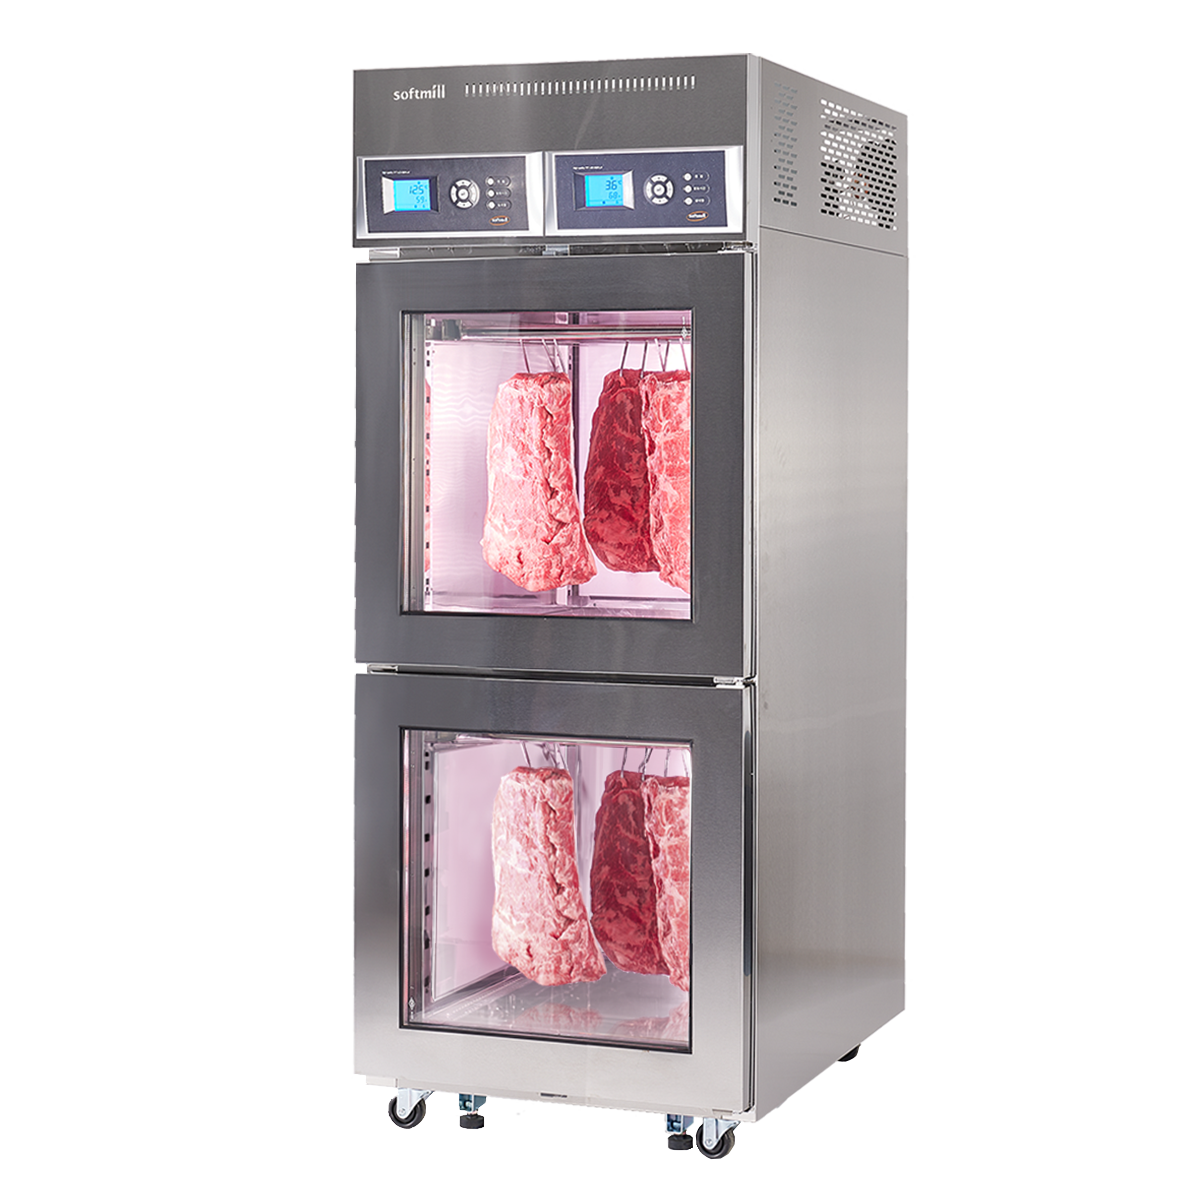 Meat Maturing Refrigerator product list link